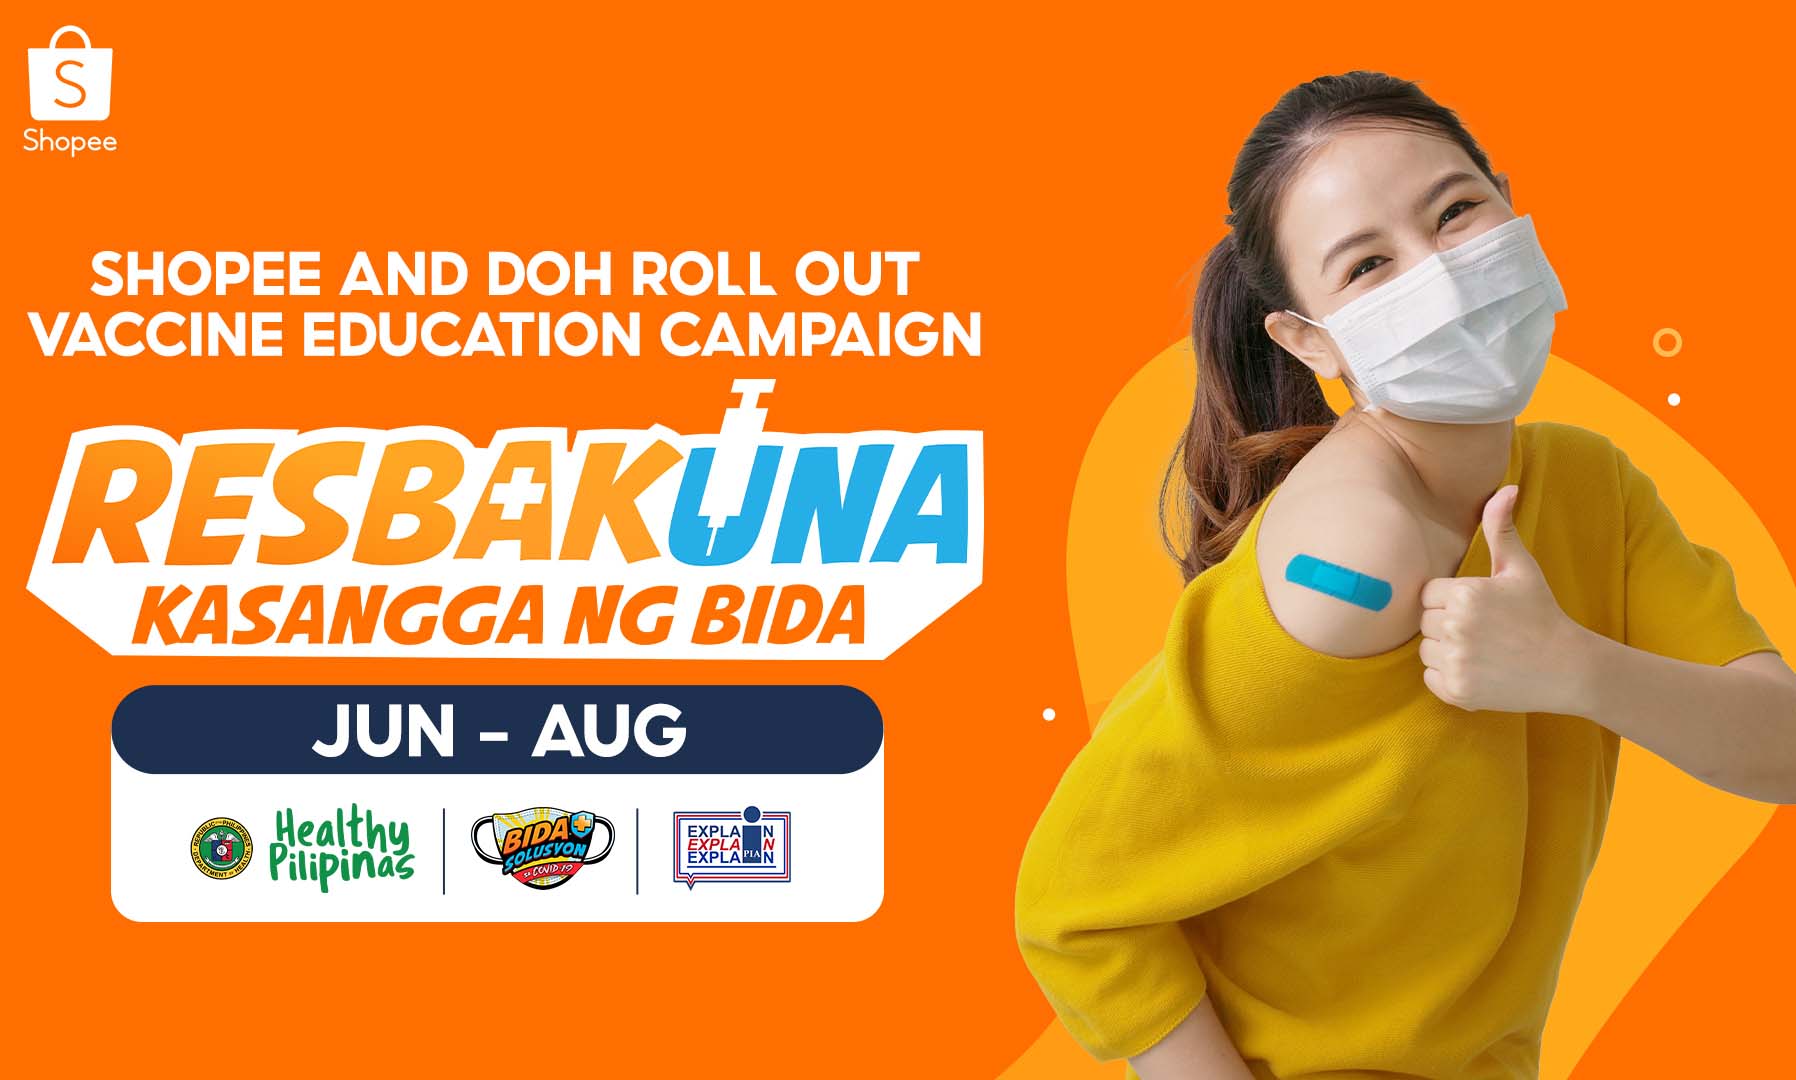 Shopee and the Department of Health team up to encourage Filipinos to get vaccinated